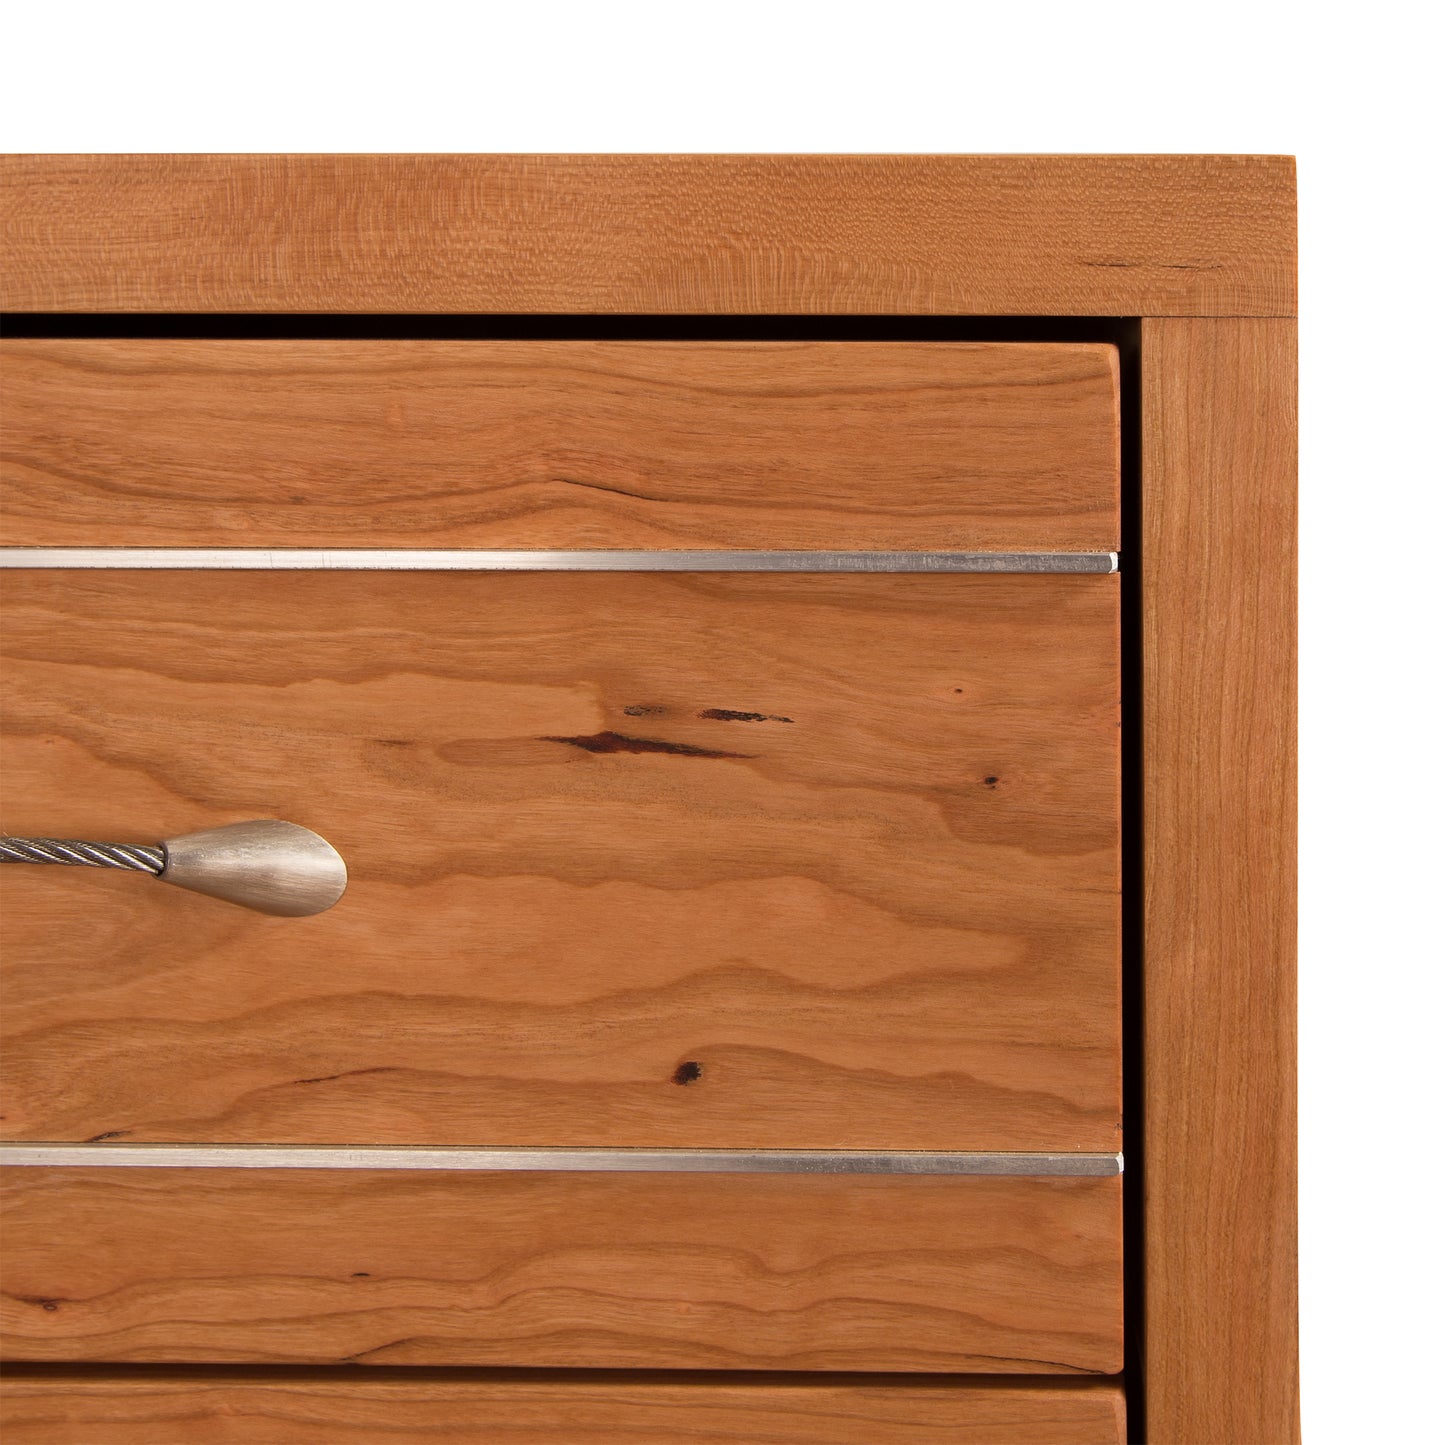 Close-up of a Vermont Furniture Designs Contemporary Cable 3-Drawer Nightstand with a metallic handle.